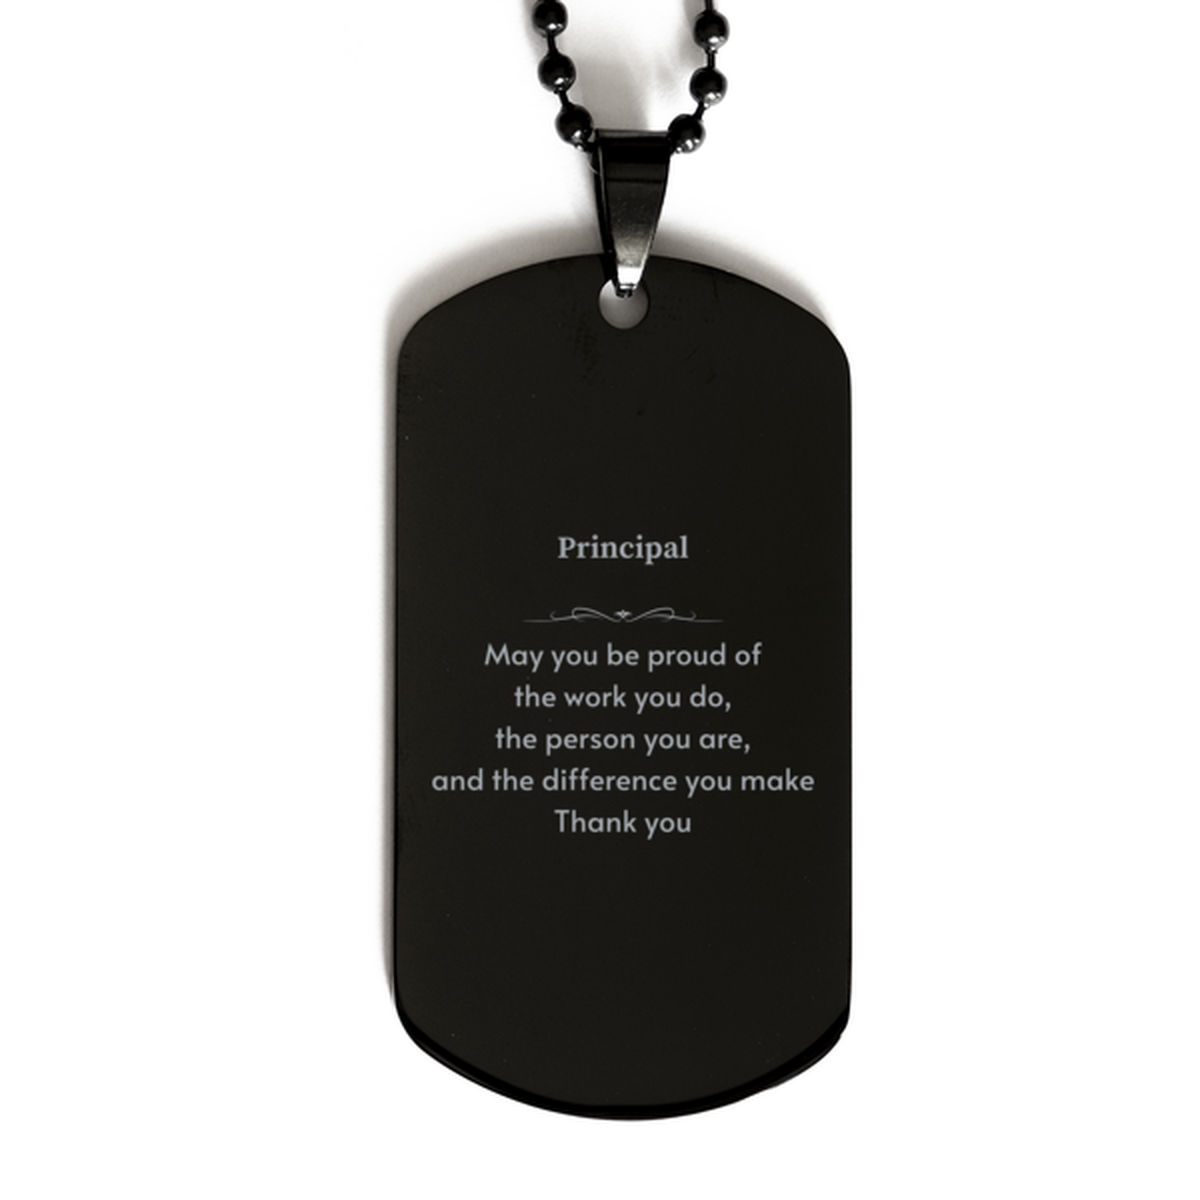 Heartwarming Black Dog Tag Retirement Coworkers Gifts for Principal, Principal May You be proud of the work you do, the person you are Gifts for Boss Men Women Friends